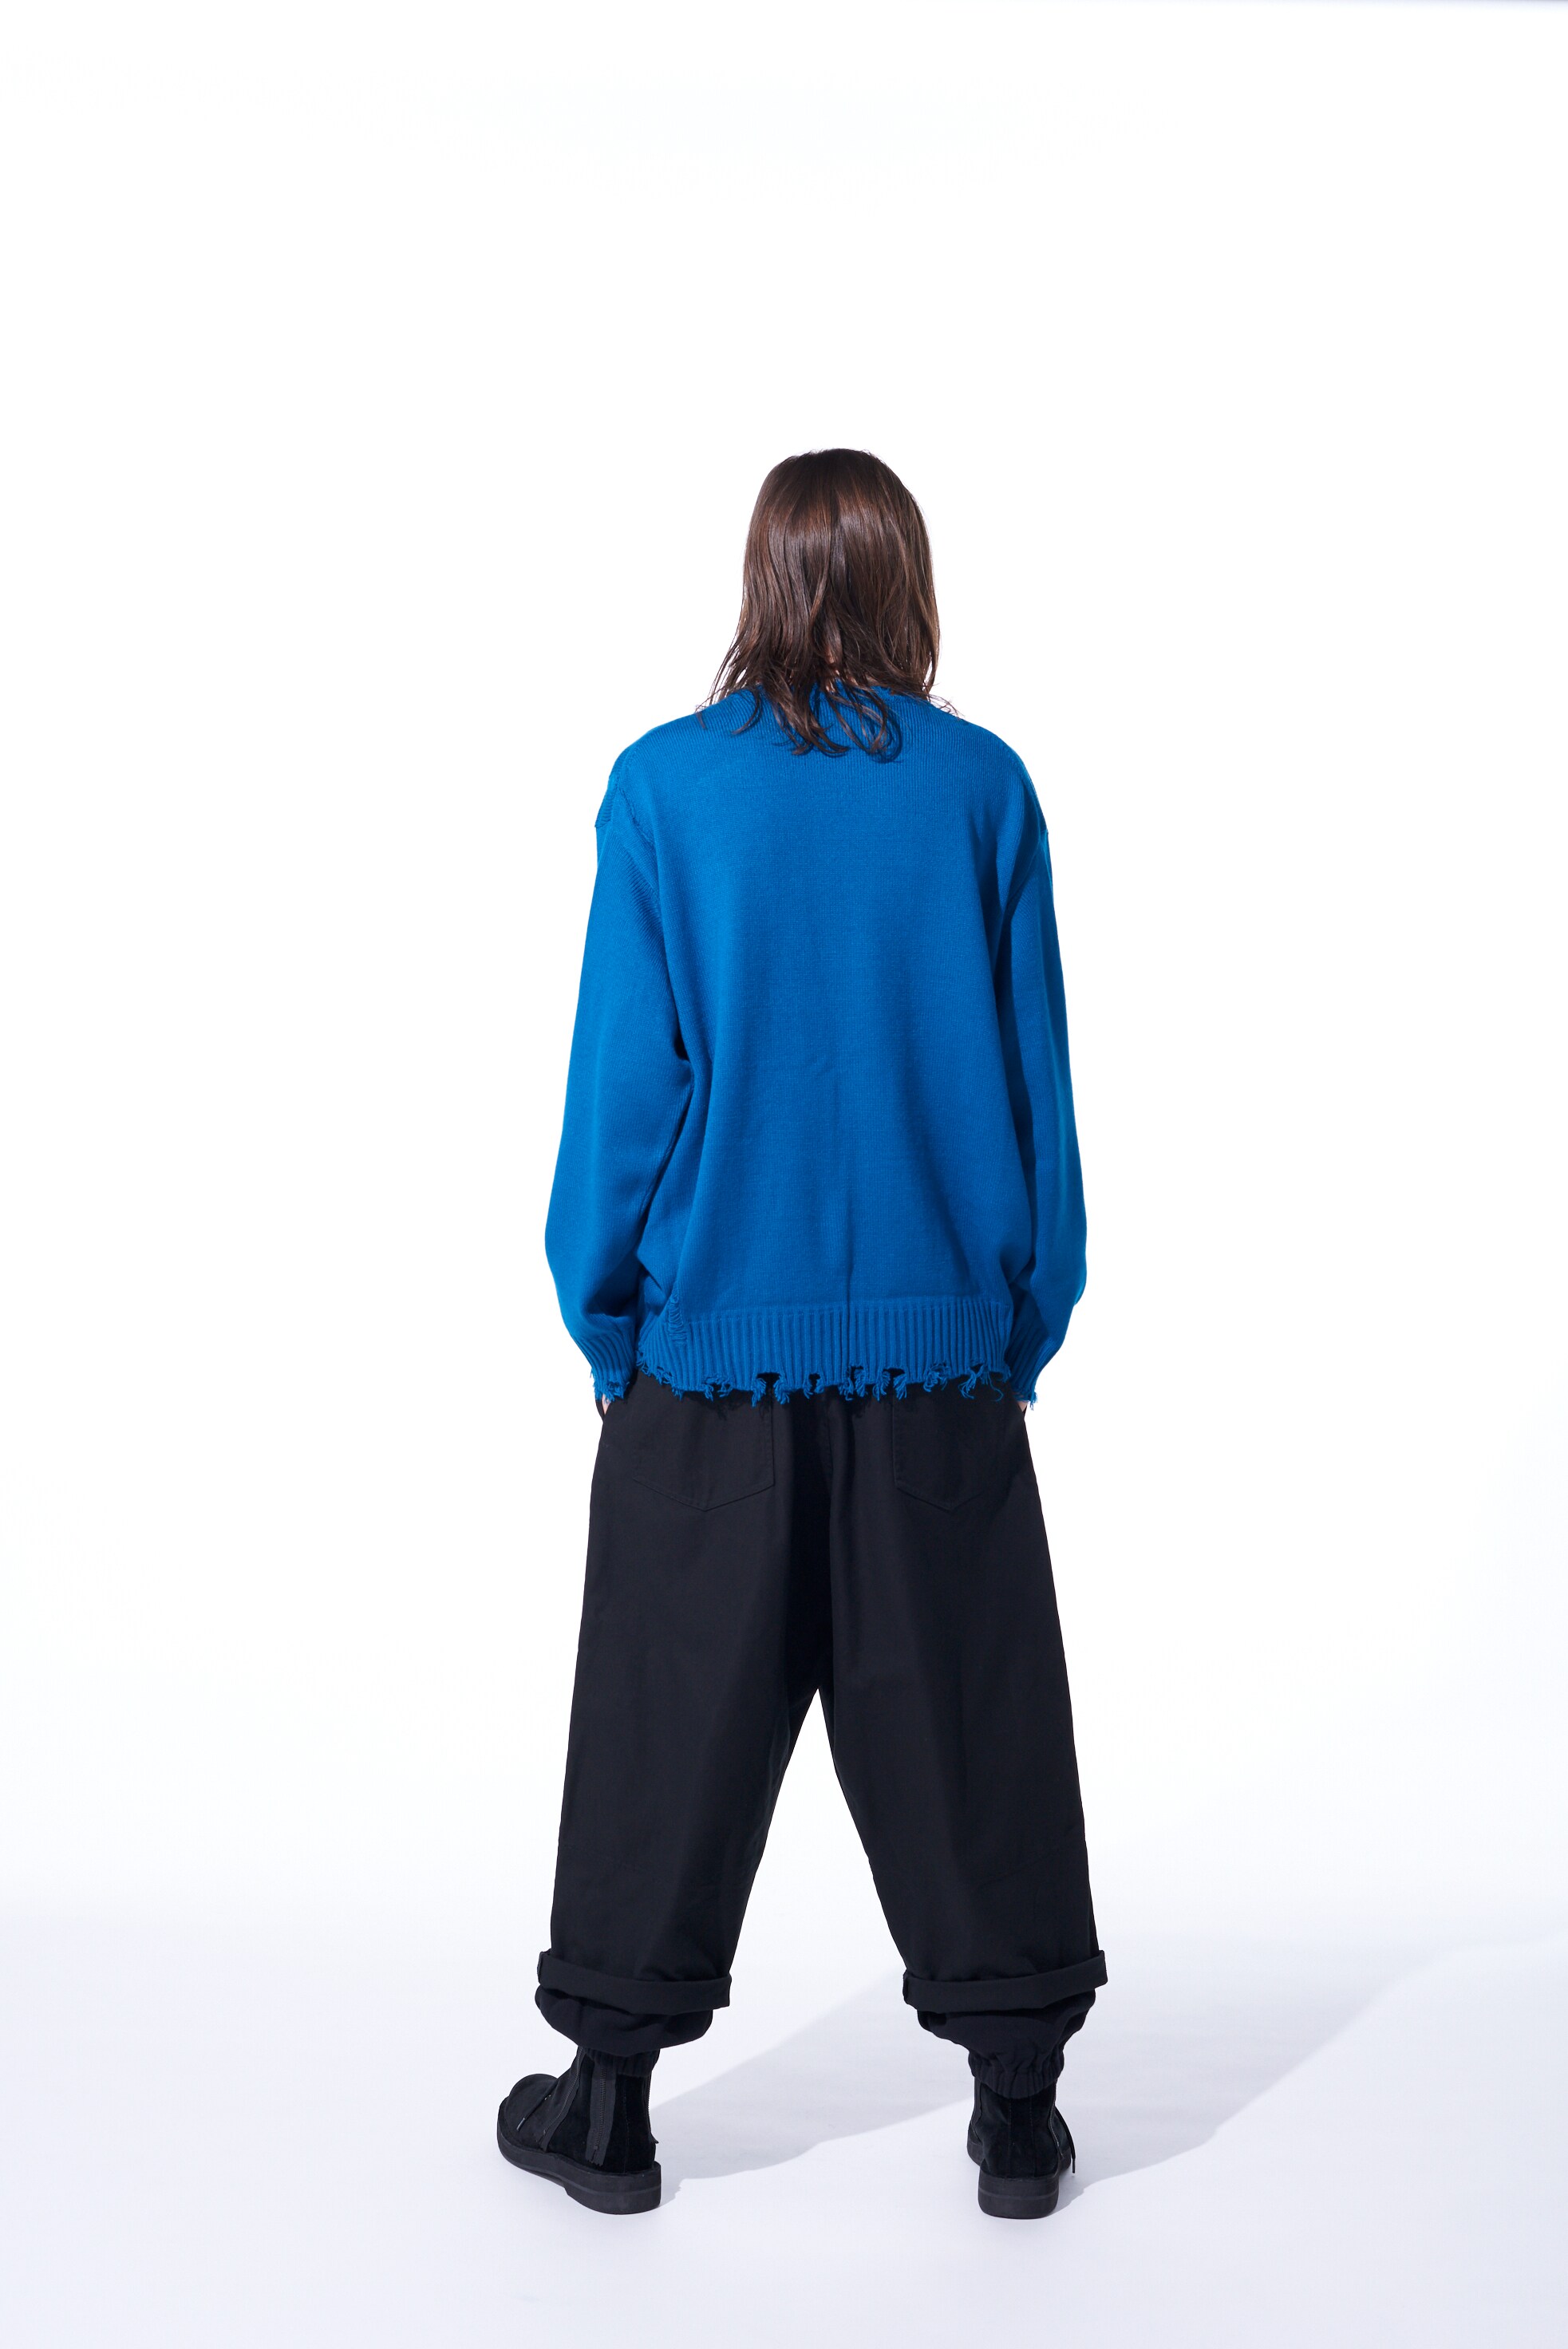 7G BULKY WOOL DAMAGE ROUND NECK PULLOVER(M Marine blue): S'YTE ...